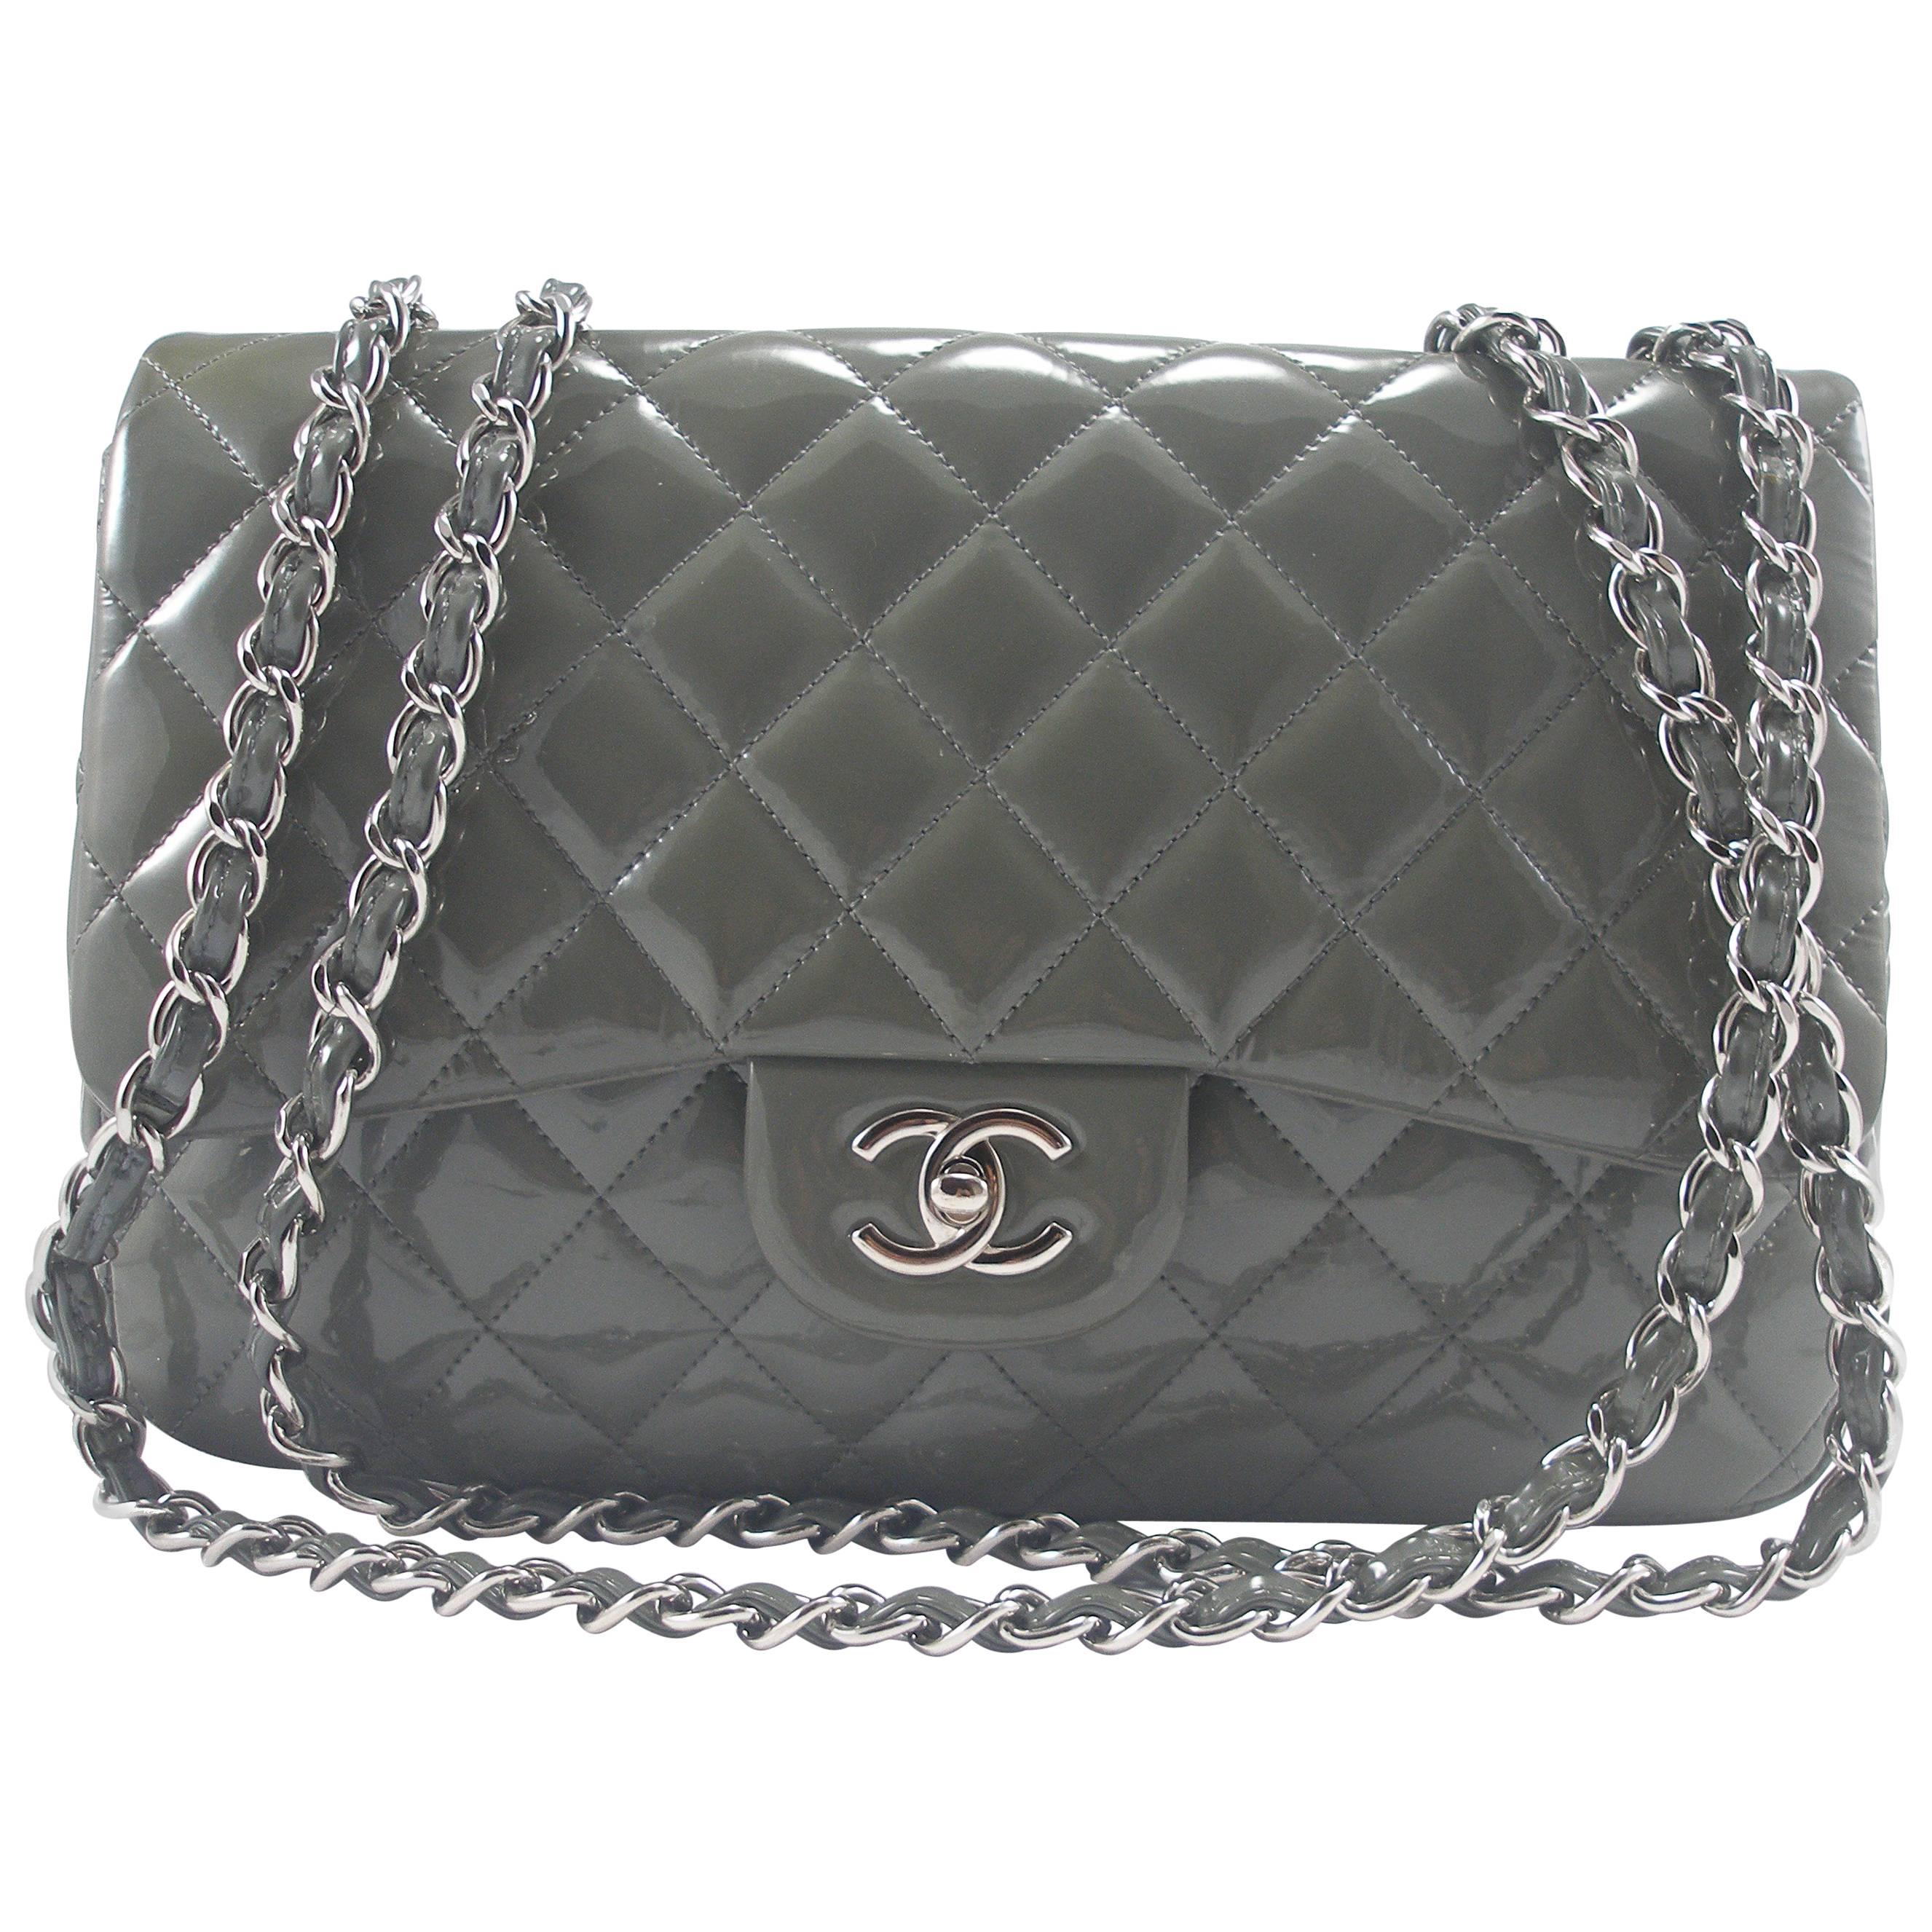  Chanel Quilted Patent Leather Classic Jumbo Chain Shoulder Bag Grey 